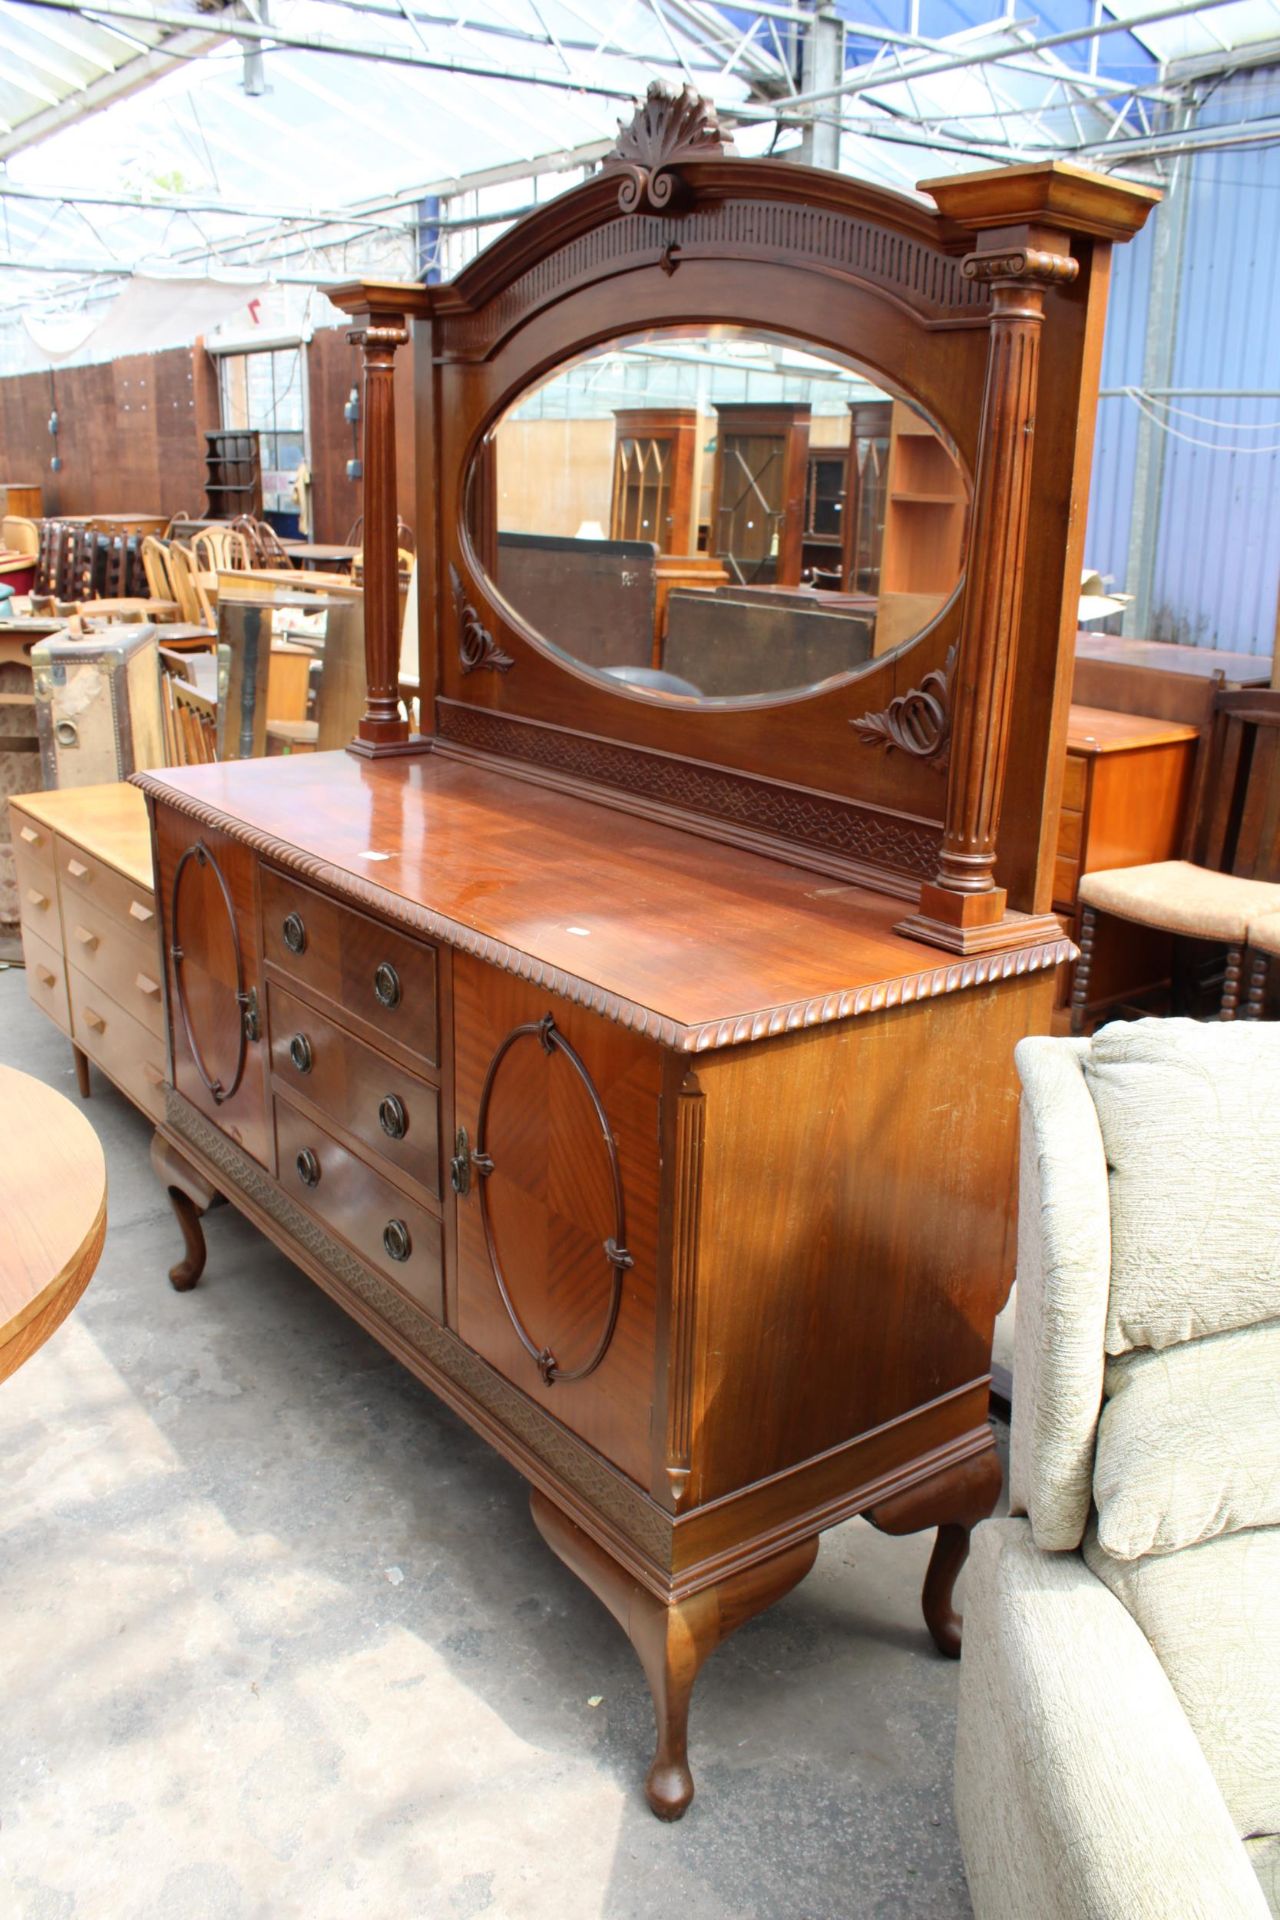 A LATE VICTORIAN MAHOGANY MIRROR-BACK SIDEBOARD ON CABRIOLE LEGS, ROPE EDGE, TWO TURNED AND FLUTED